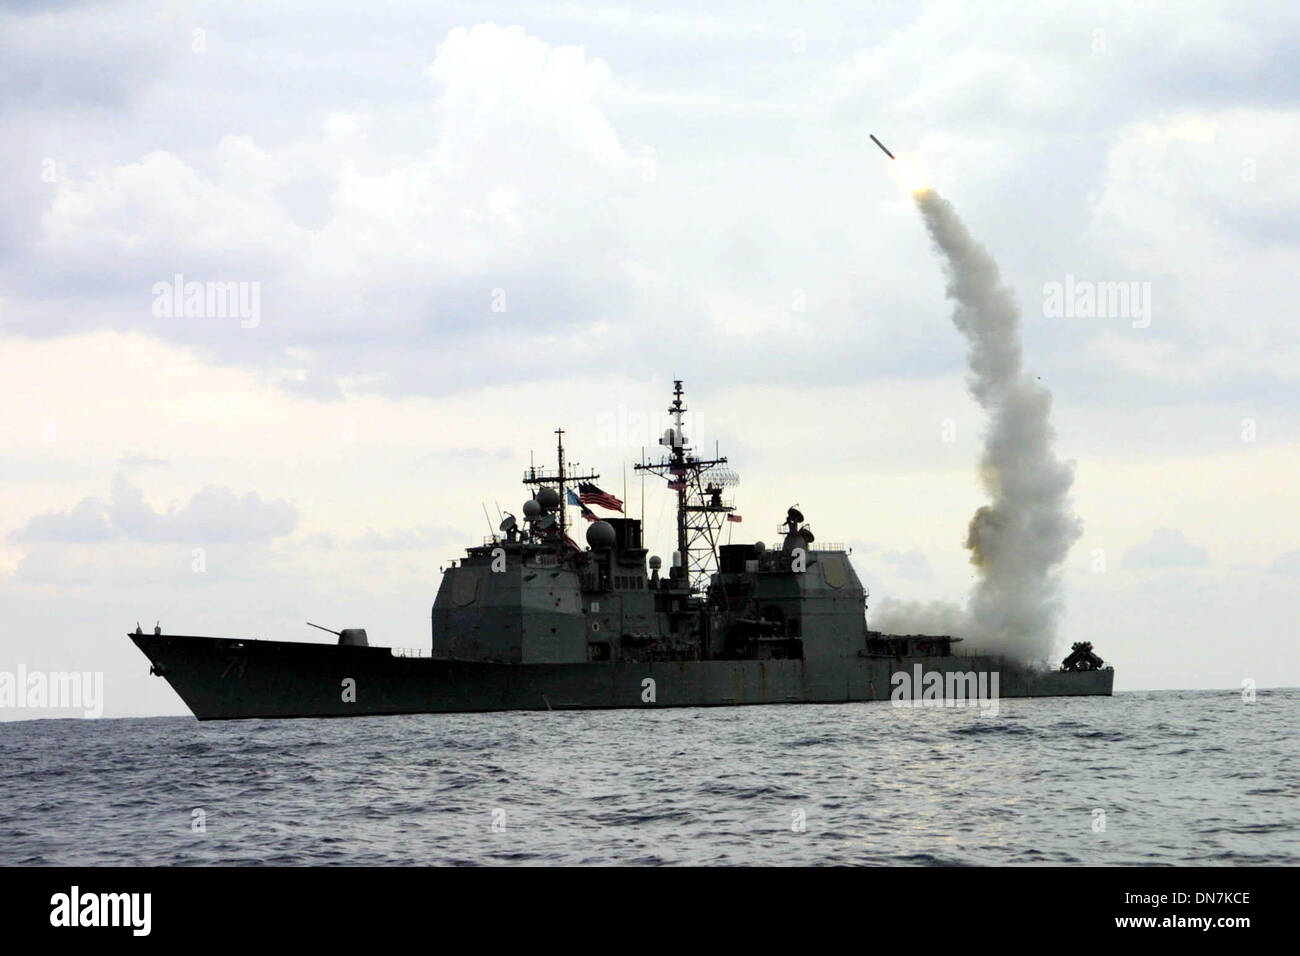 Nov. 23, 2002 - A Tomahawk cruise missile launches from USS Cape St. George, operating in the eastern Mediterranean Sea in support of Operation Iraqi Freedom. MOLL/DOD/   K29852(Credit Image: © Globe Photos/ZUMAPRESS.com) Stock Photo